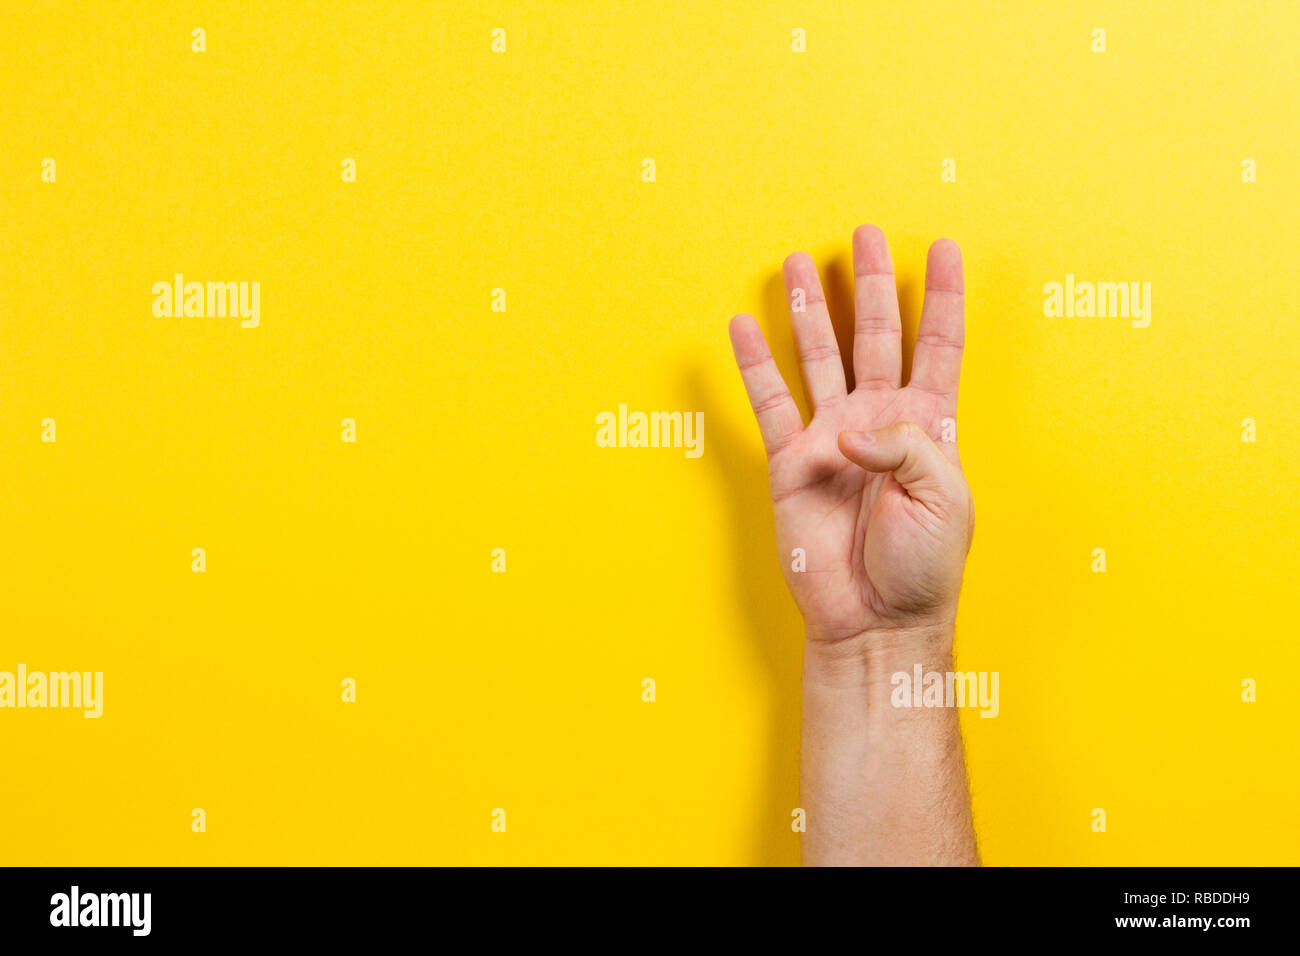 Man hand showing four fingers on yellow background. Number two symbol Stock Photo